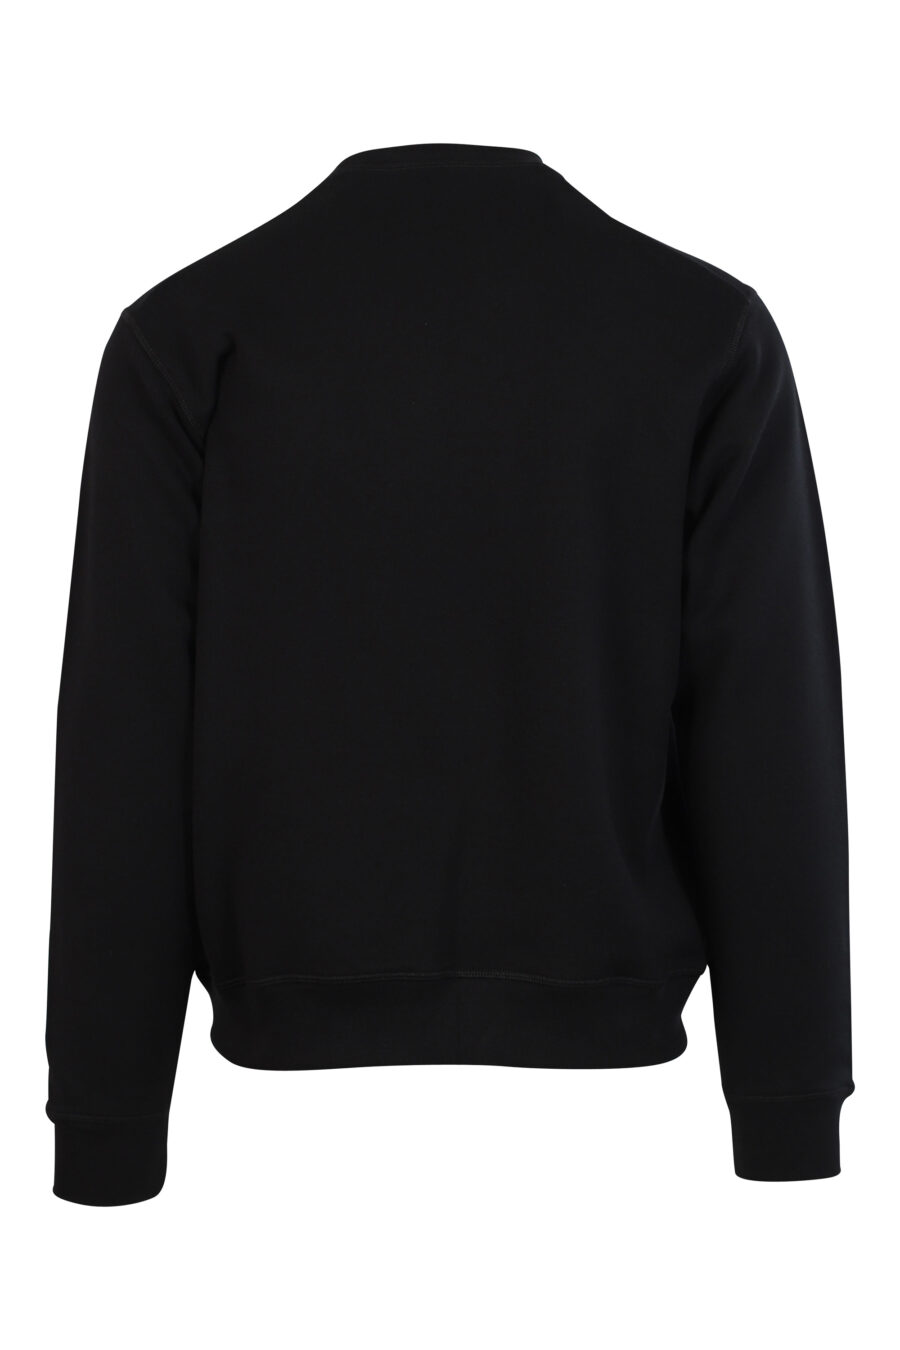 Black sweatshirt with white centred minilogue - 8052134120460 2